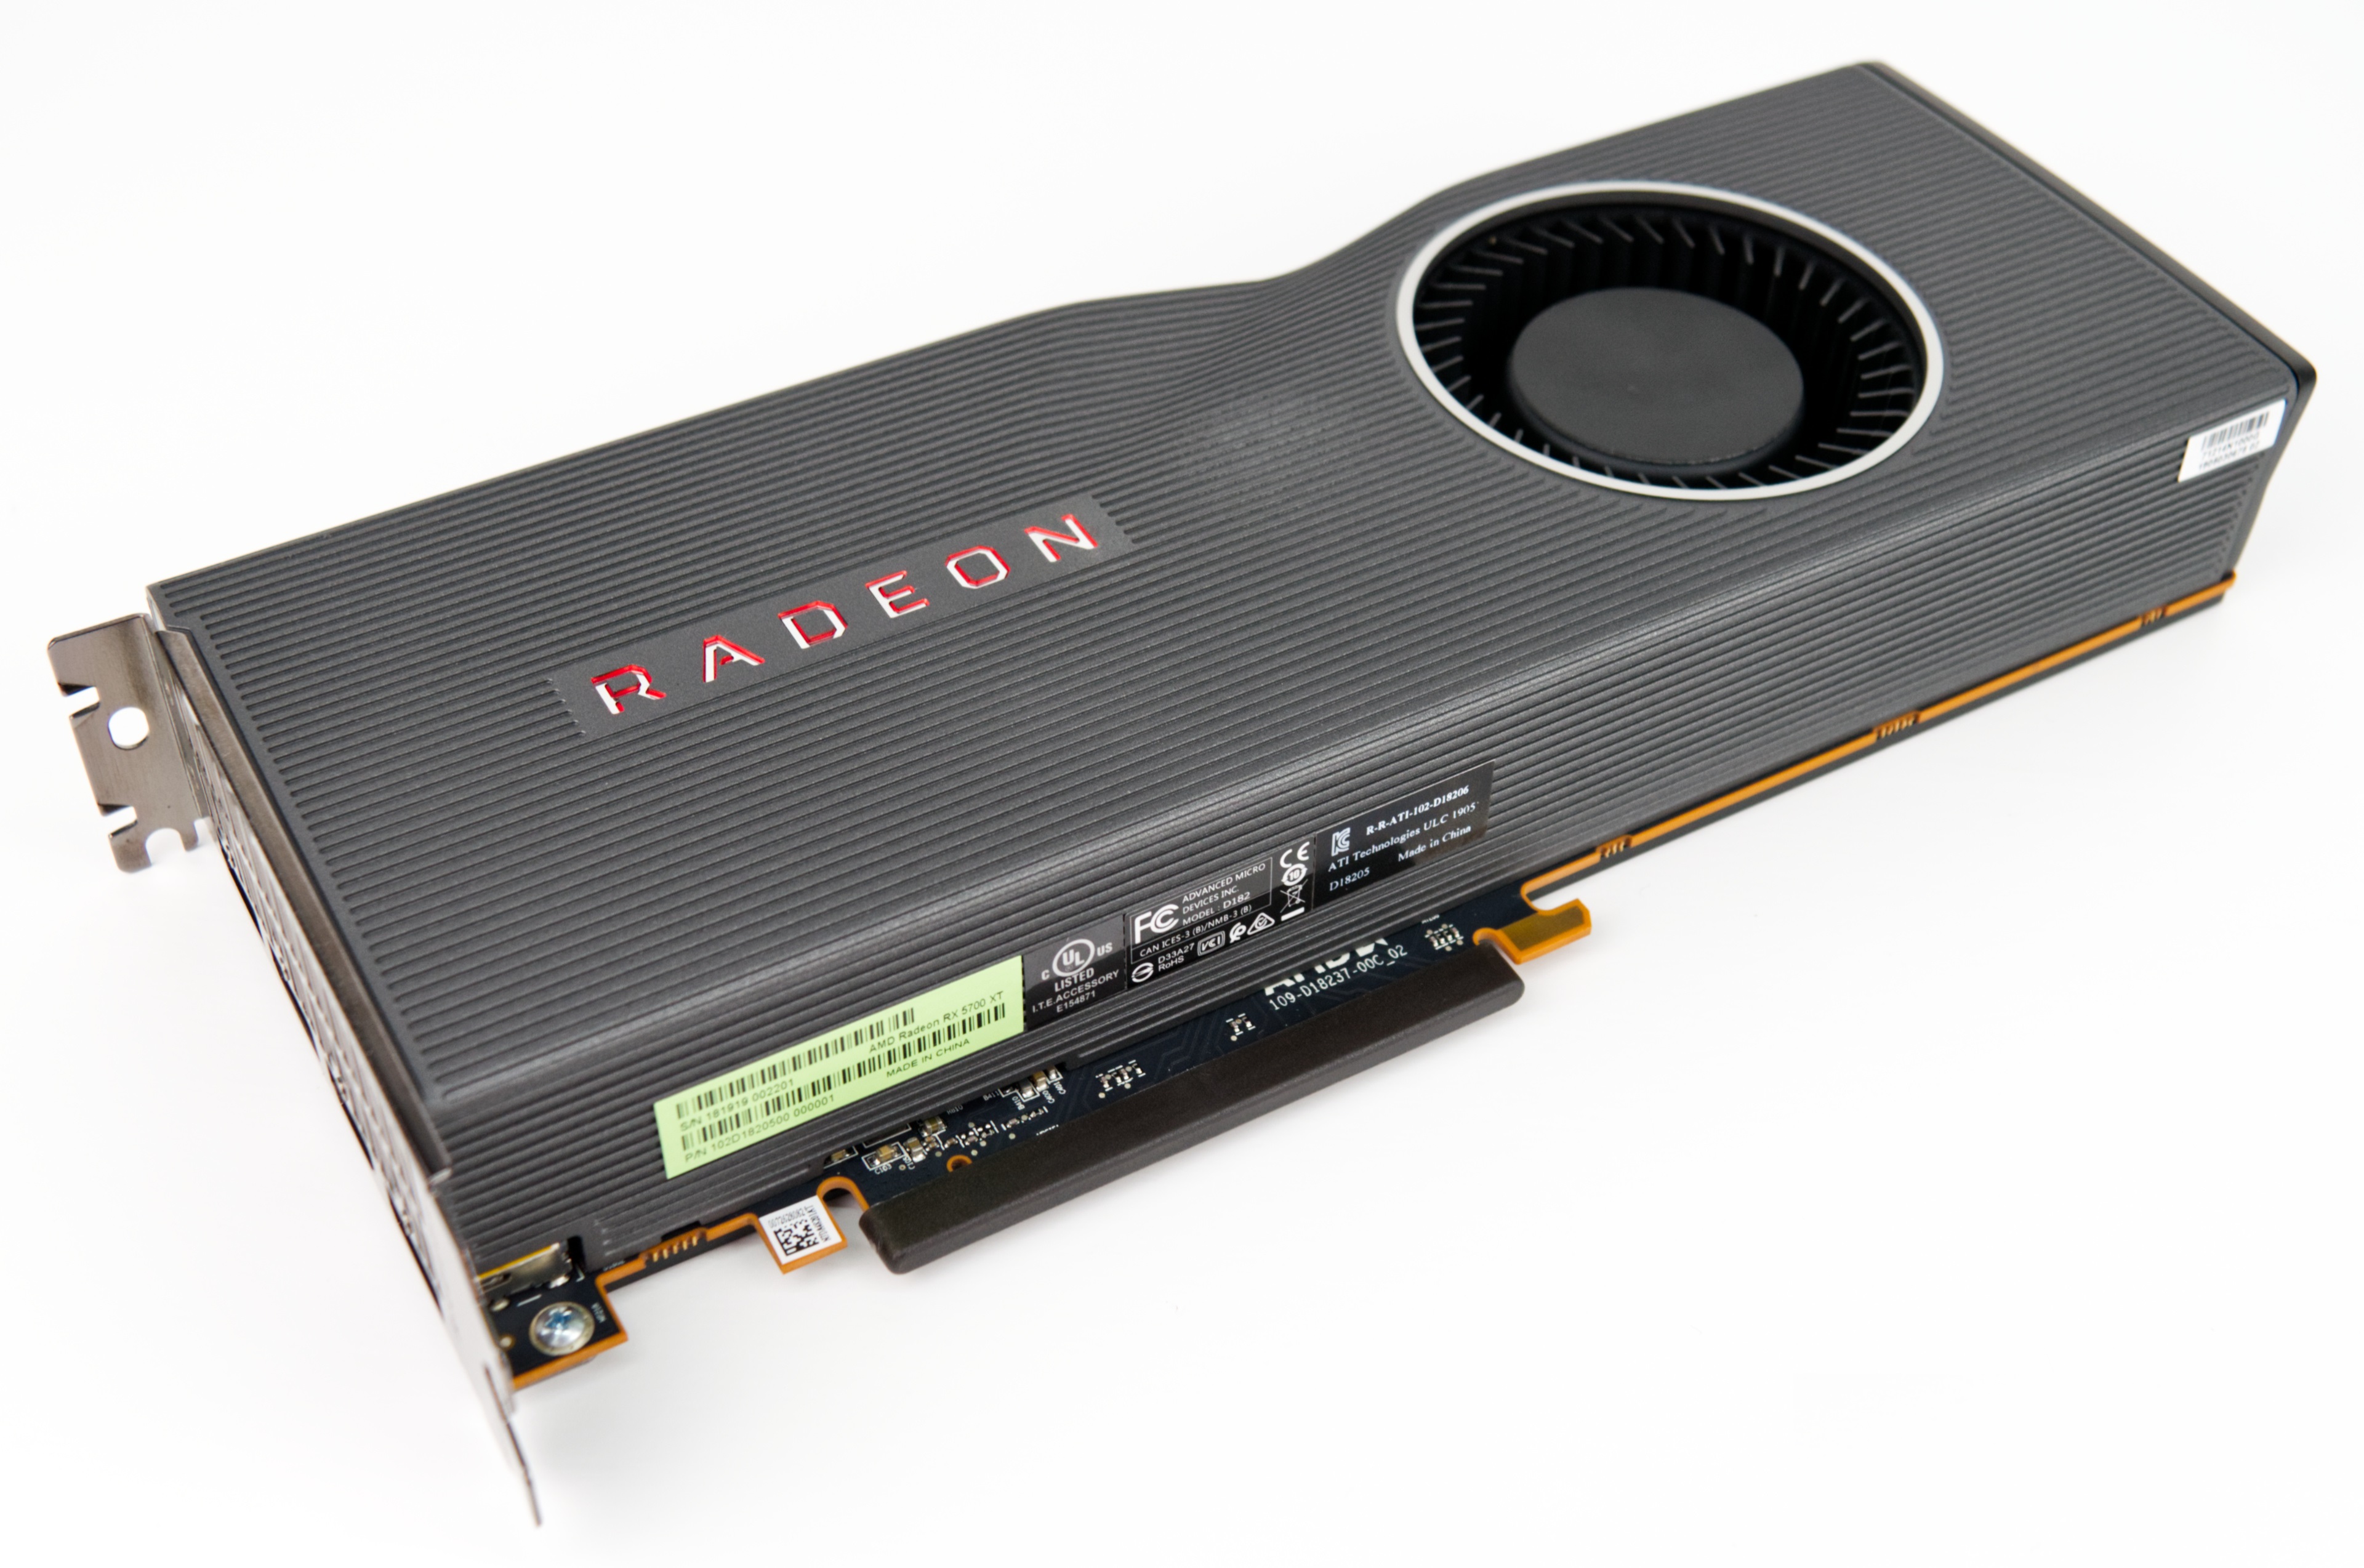 AMD Radeon RX 5700 XT Review: Known issues of the reference design